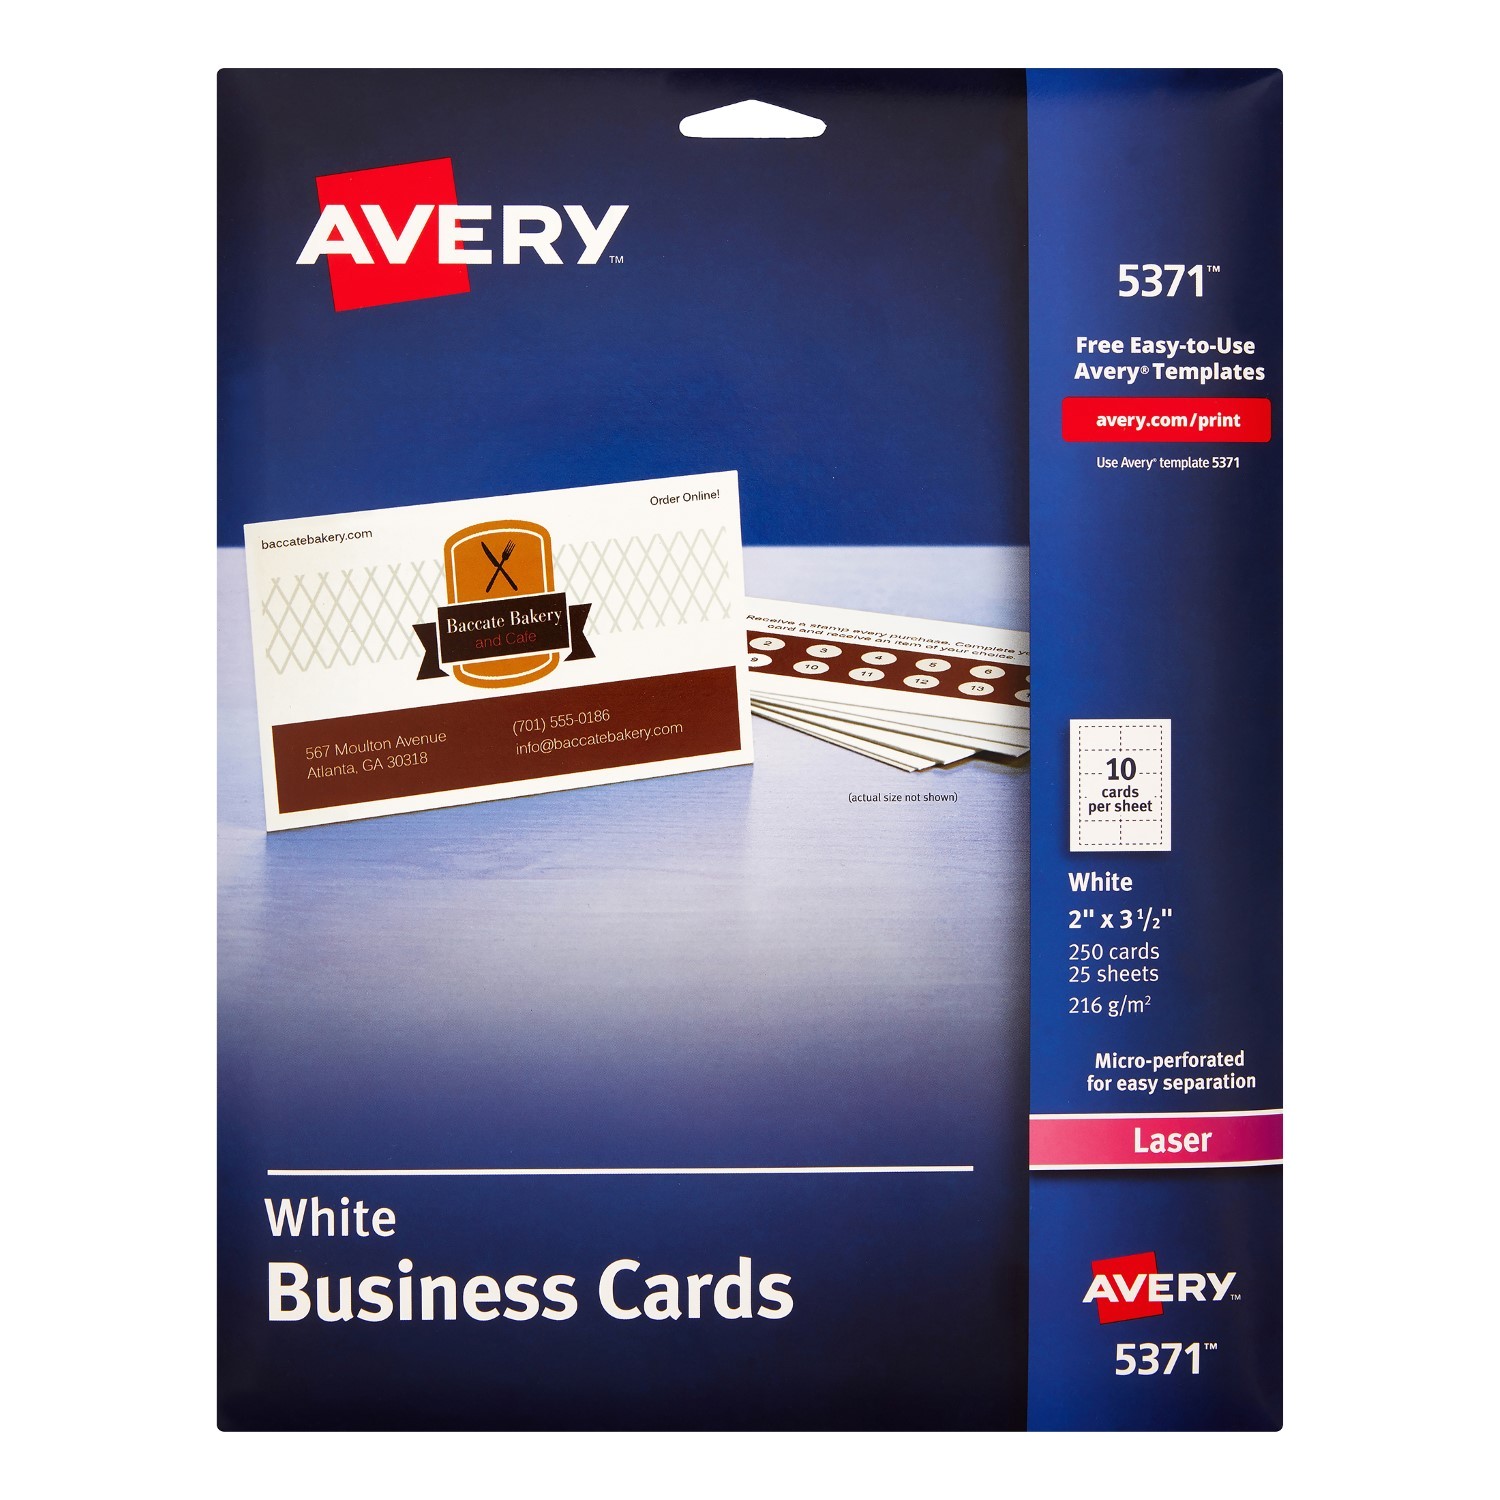 how-to-use-avery-business-card-templates-in-word-williamson-ga-us